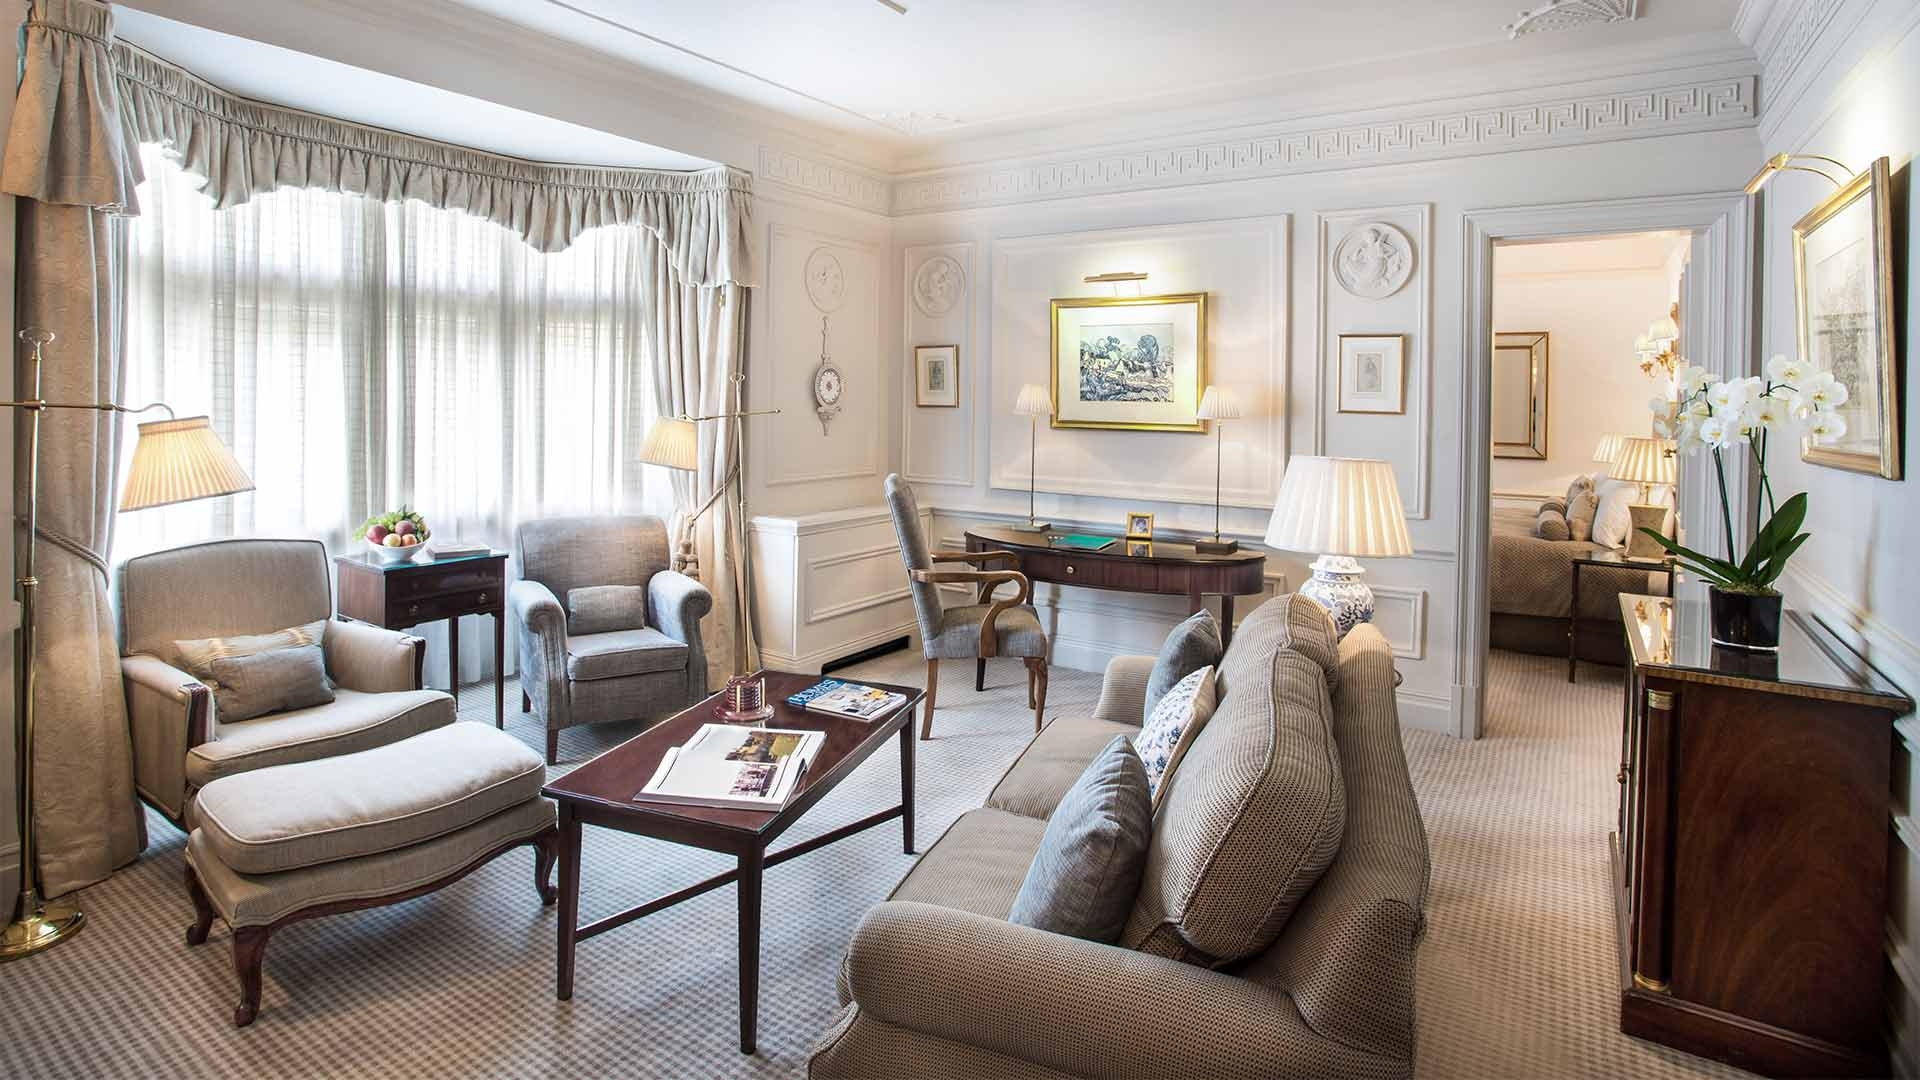 Exclusive luxury boutique hotel in central London near St James's Park